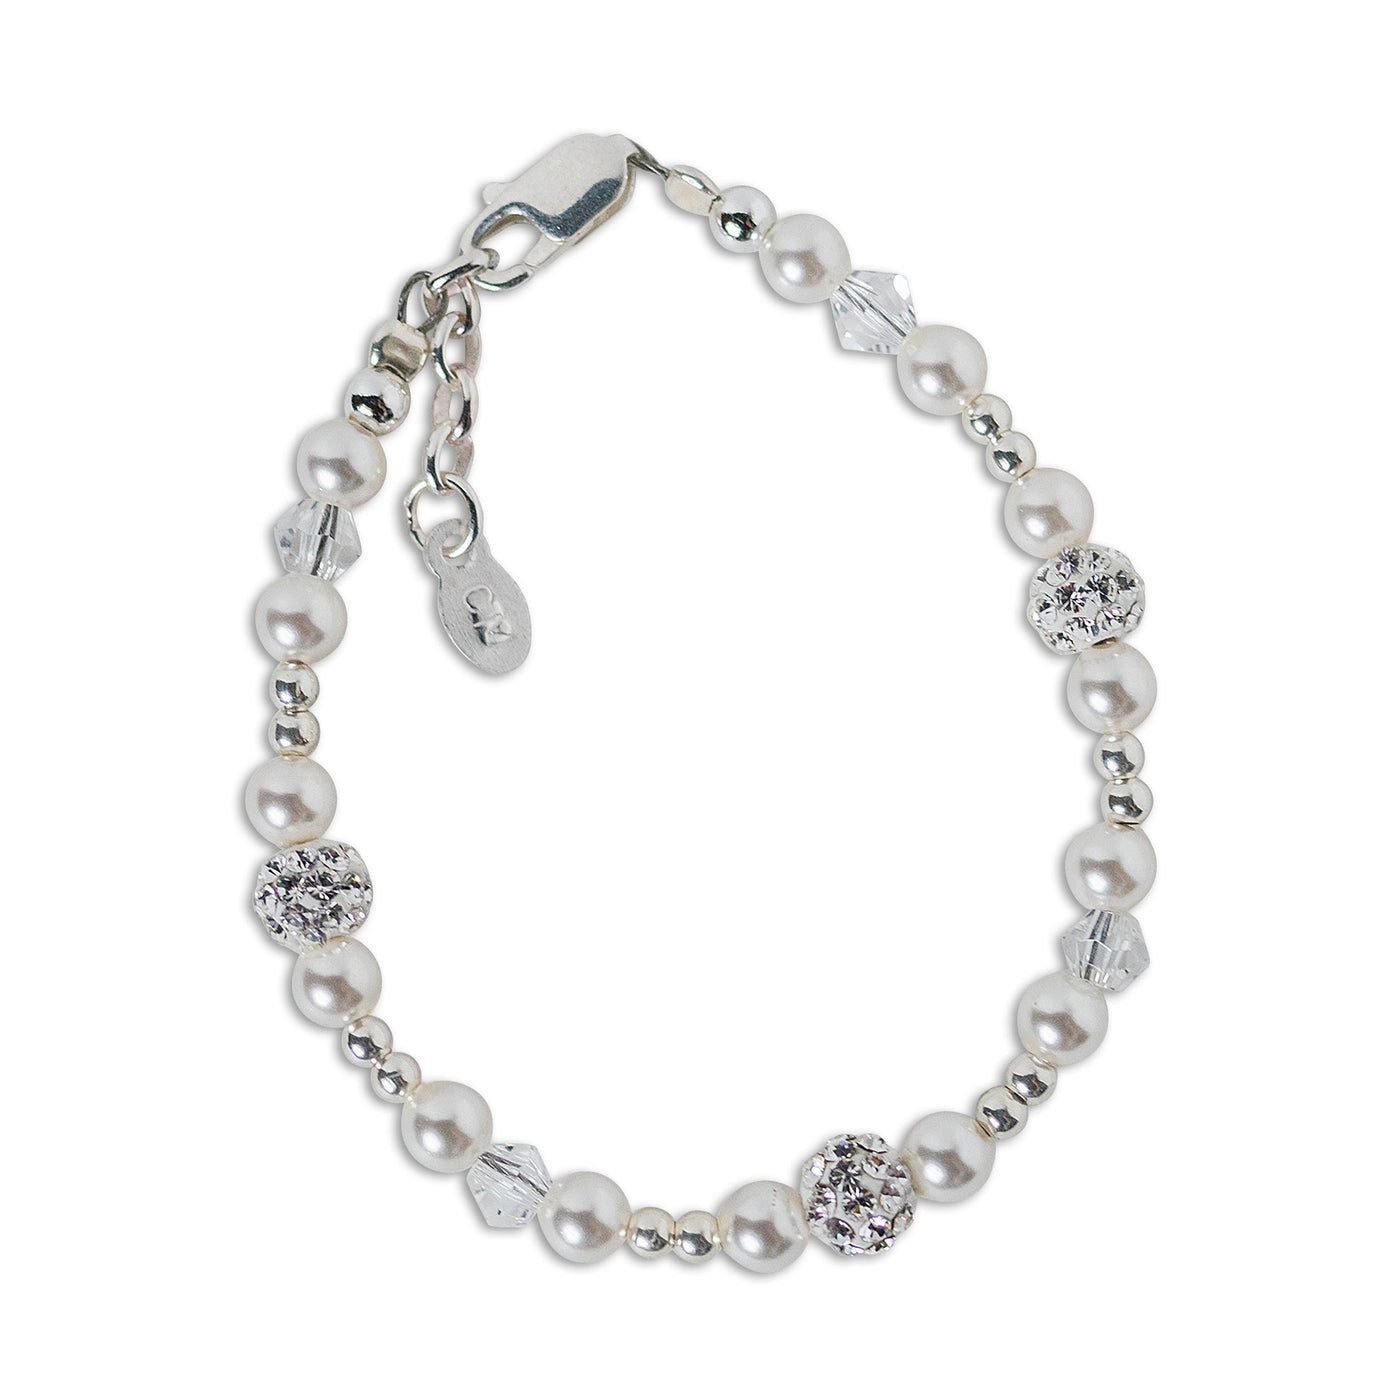 Luna Sterling Silver and White Pearl Bracelet